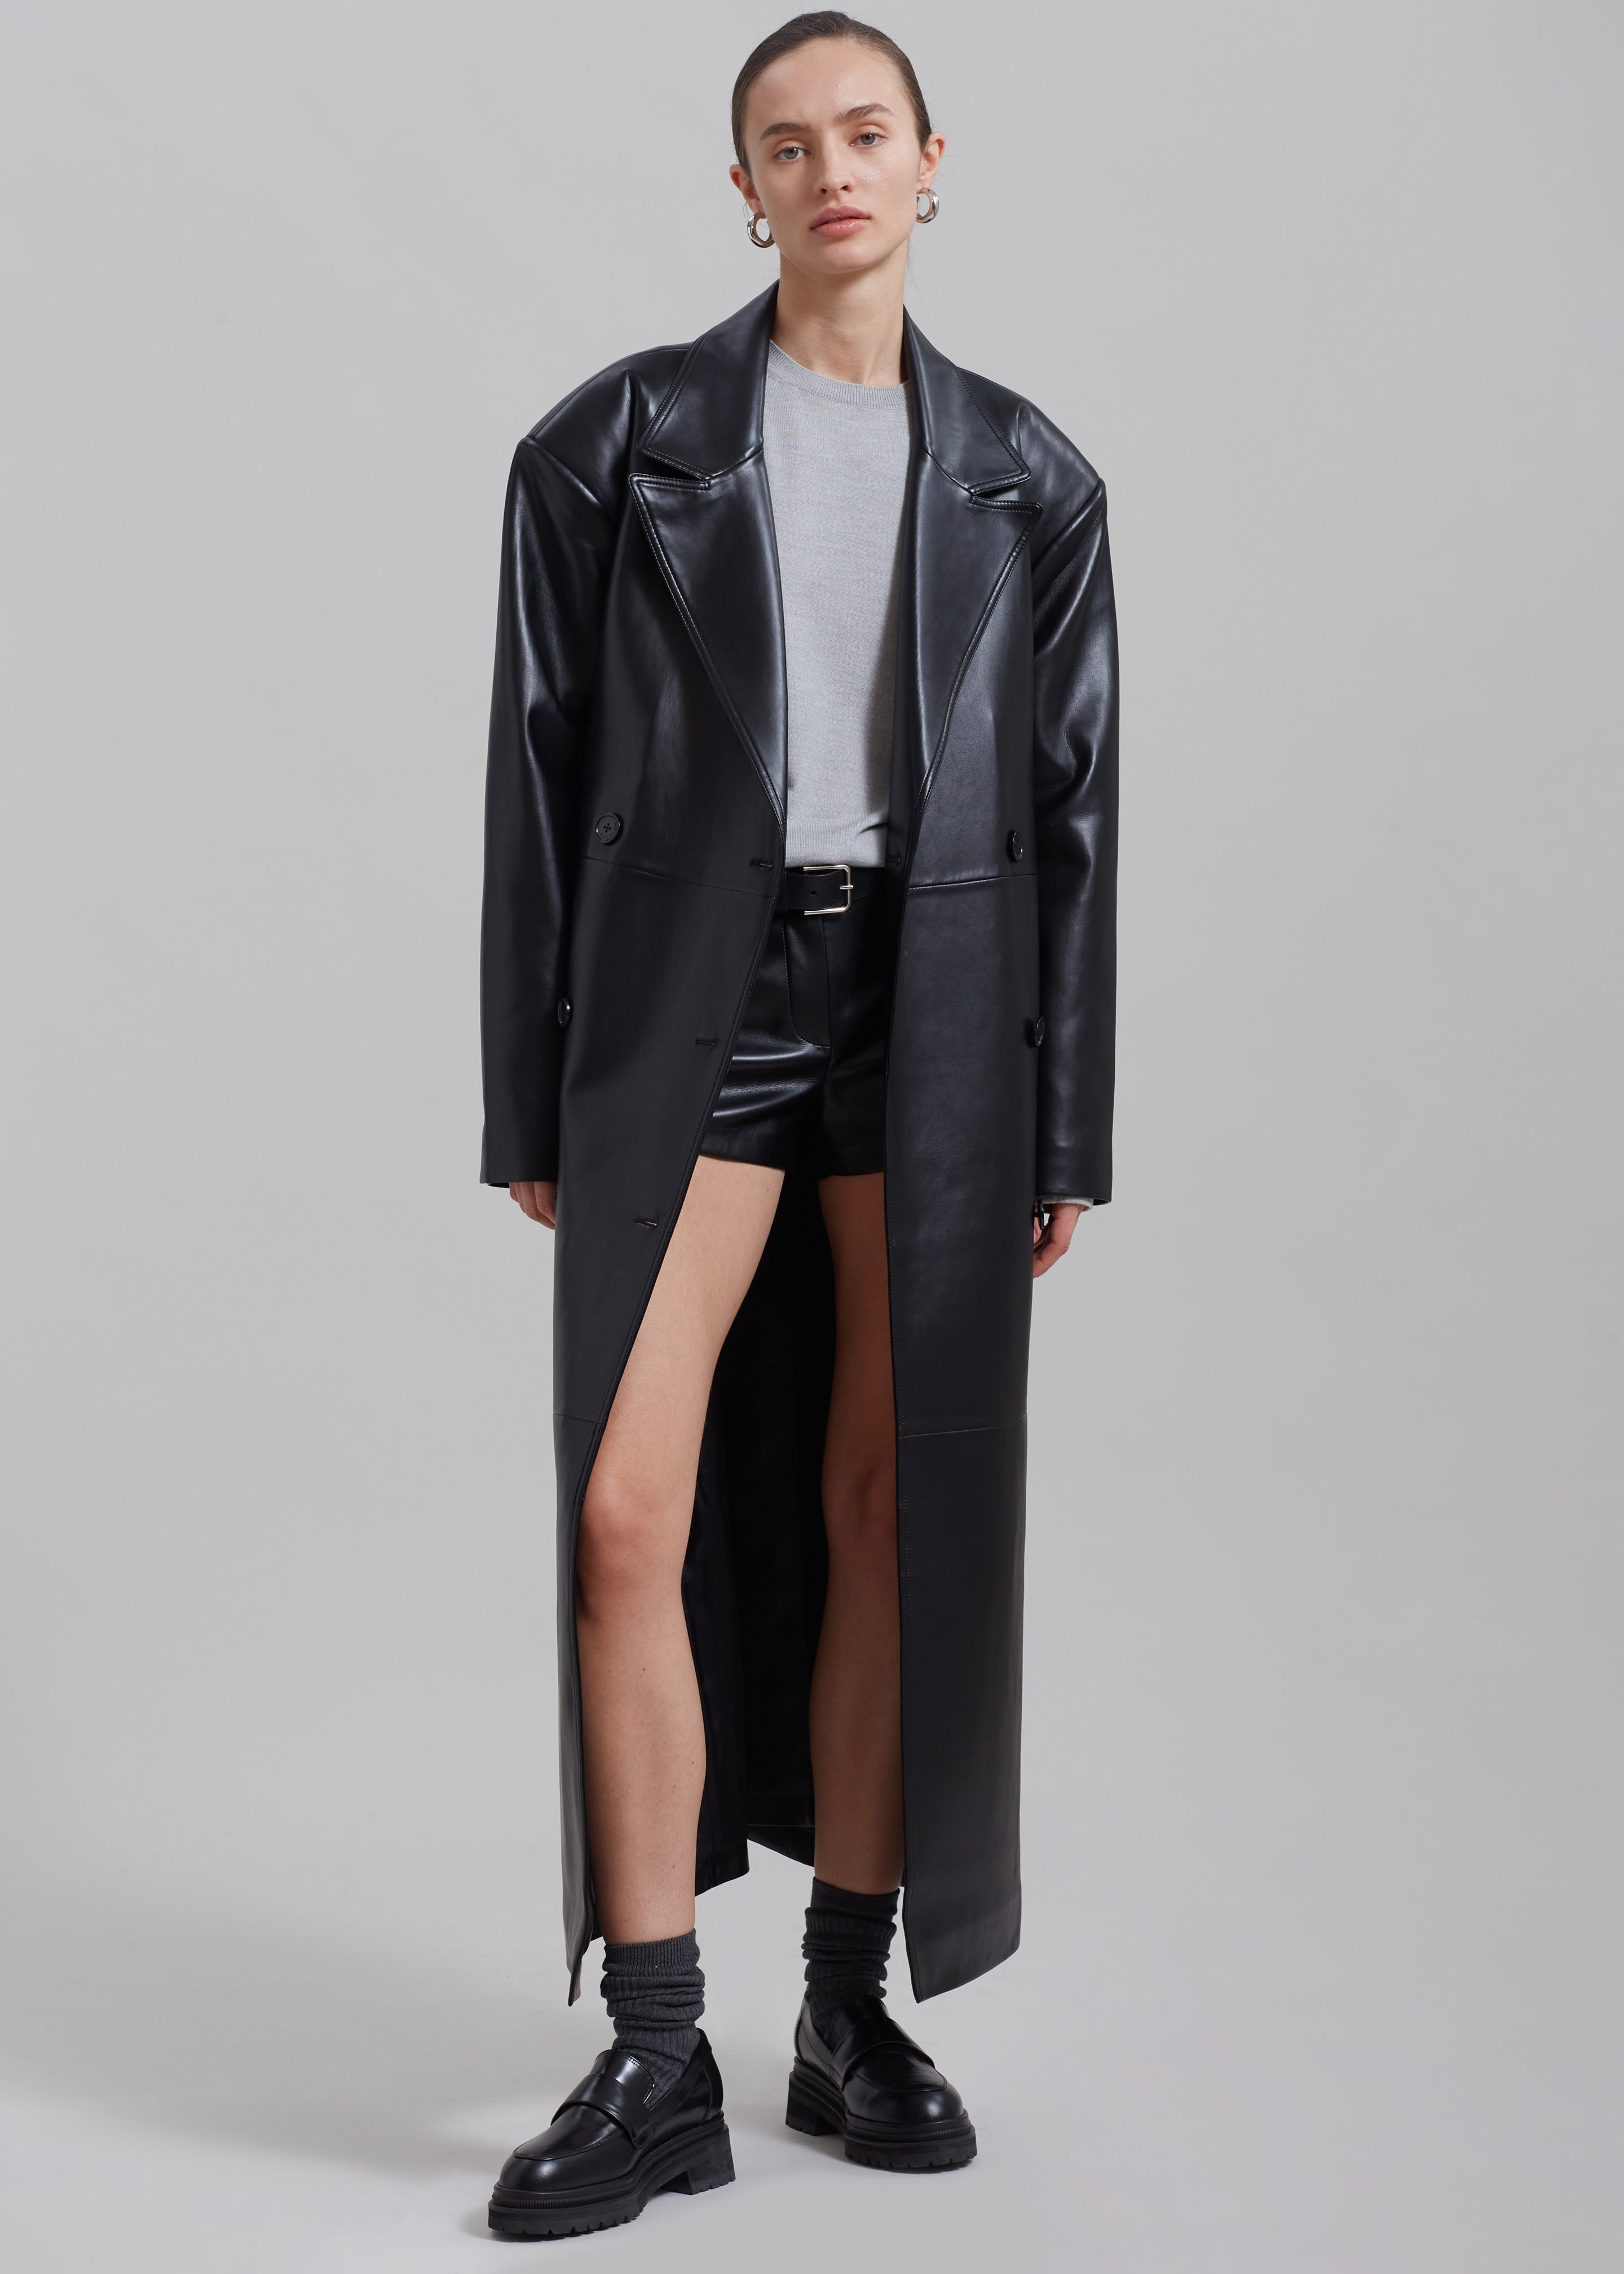 Leather Texture – Frankie Shop Europe